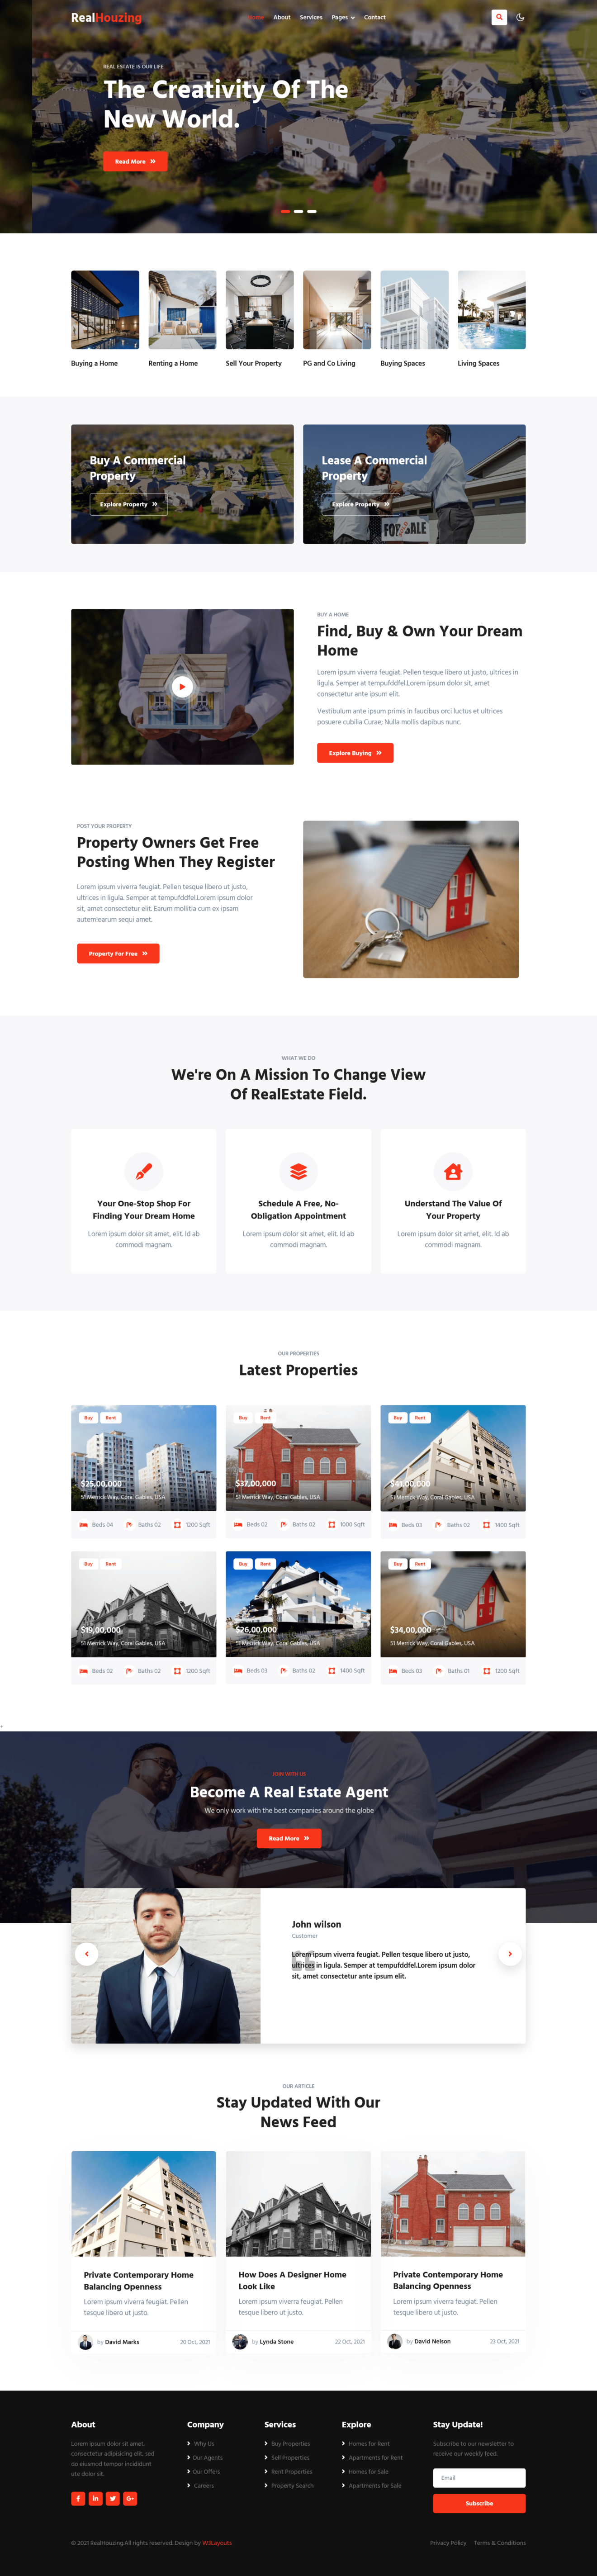 real houzing website template - home page